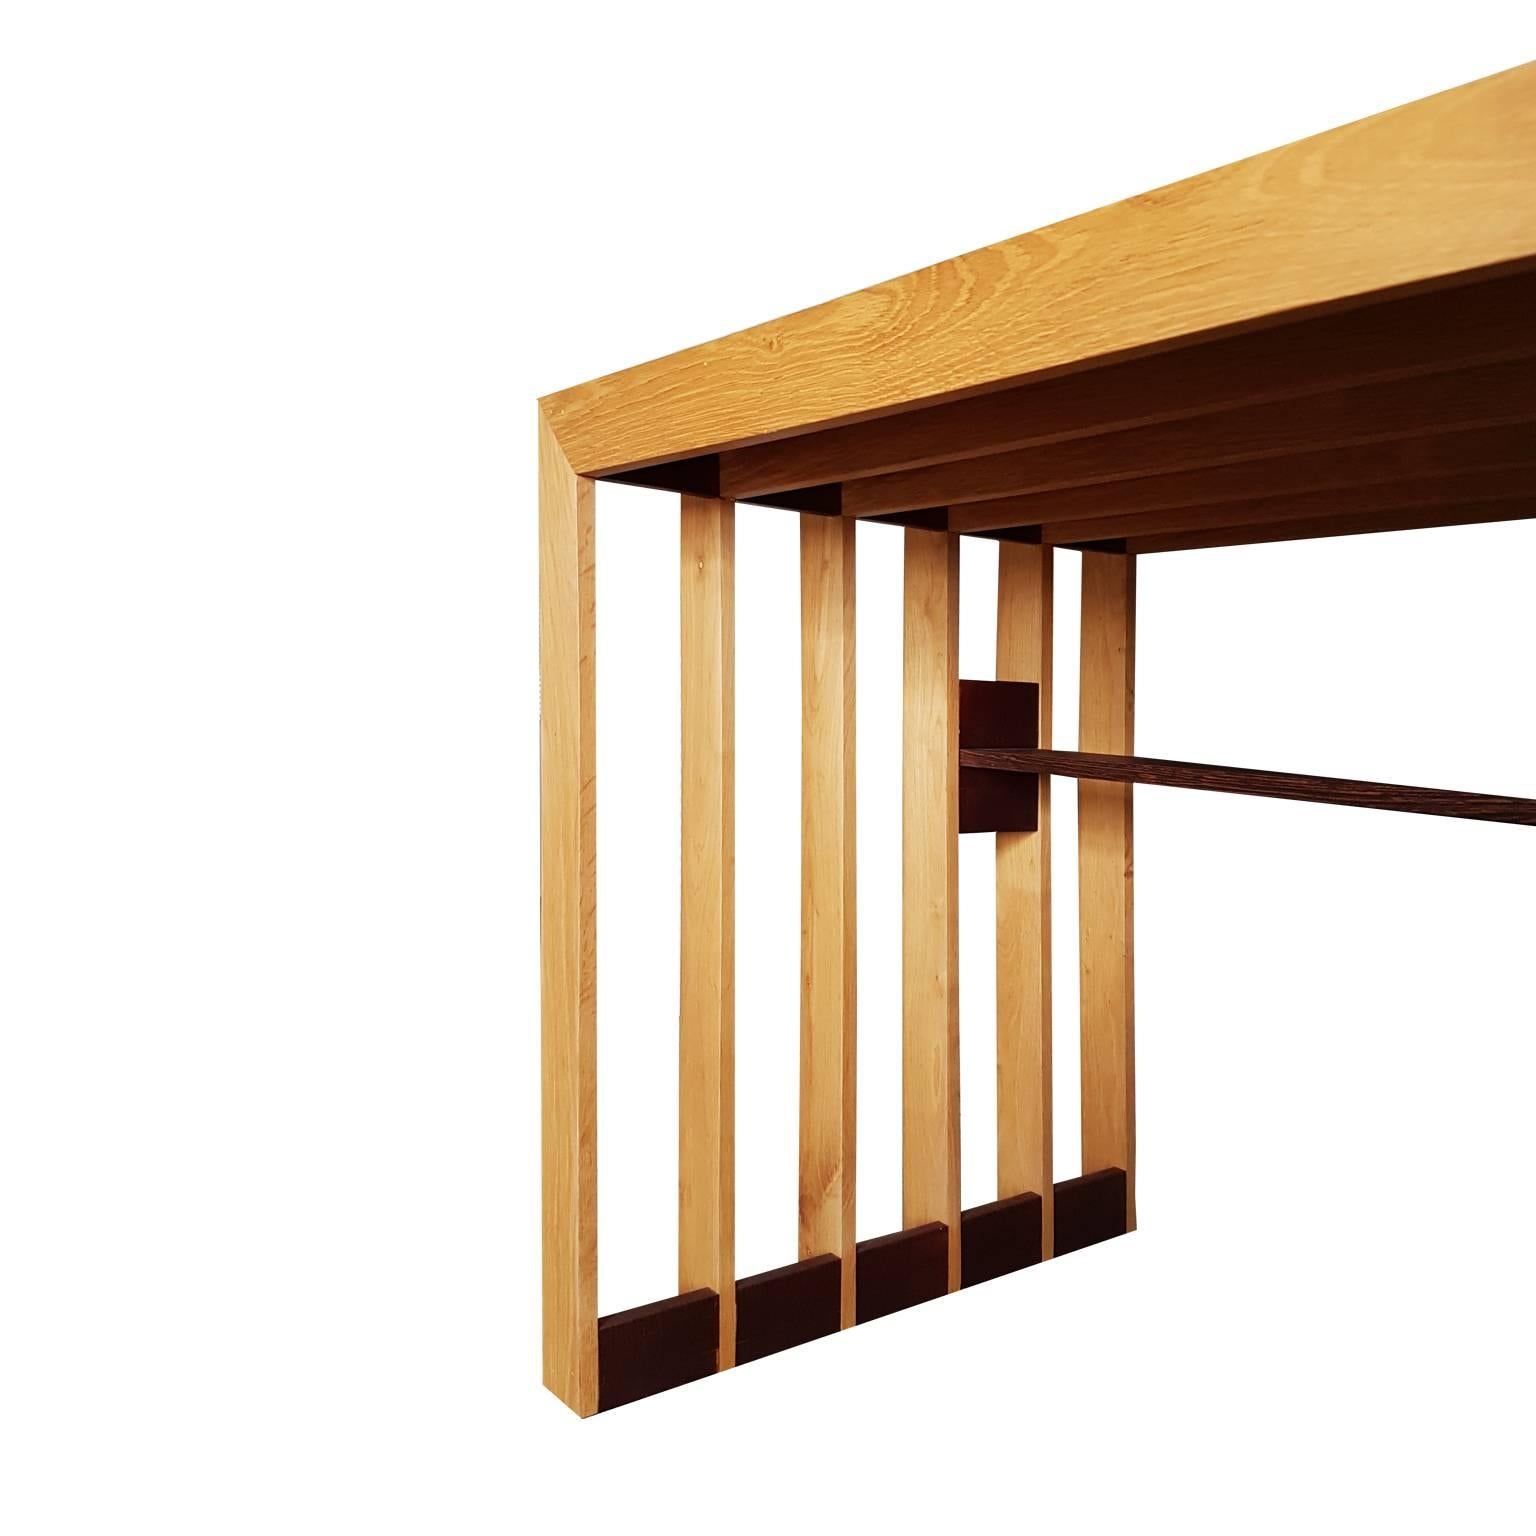 Padouk Italian Artisan Desk in Durmstand, Paduca and Wengè Wood, 21st Century For Sale